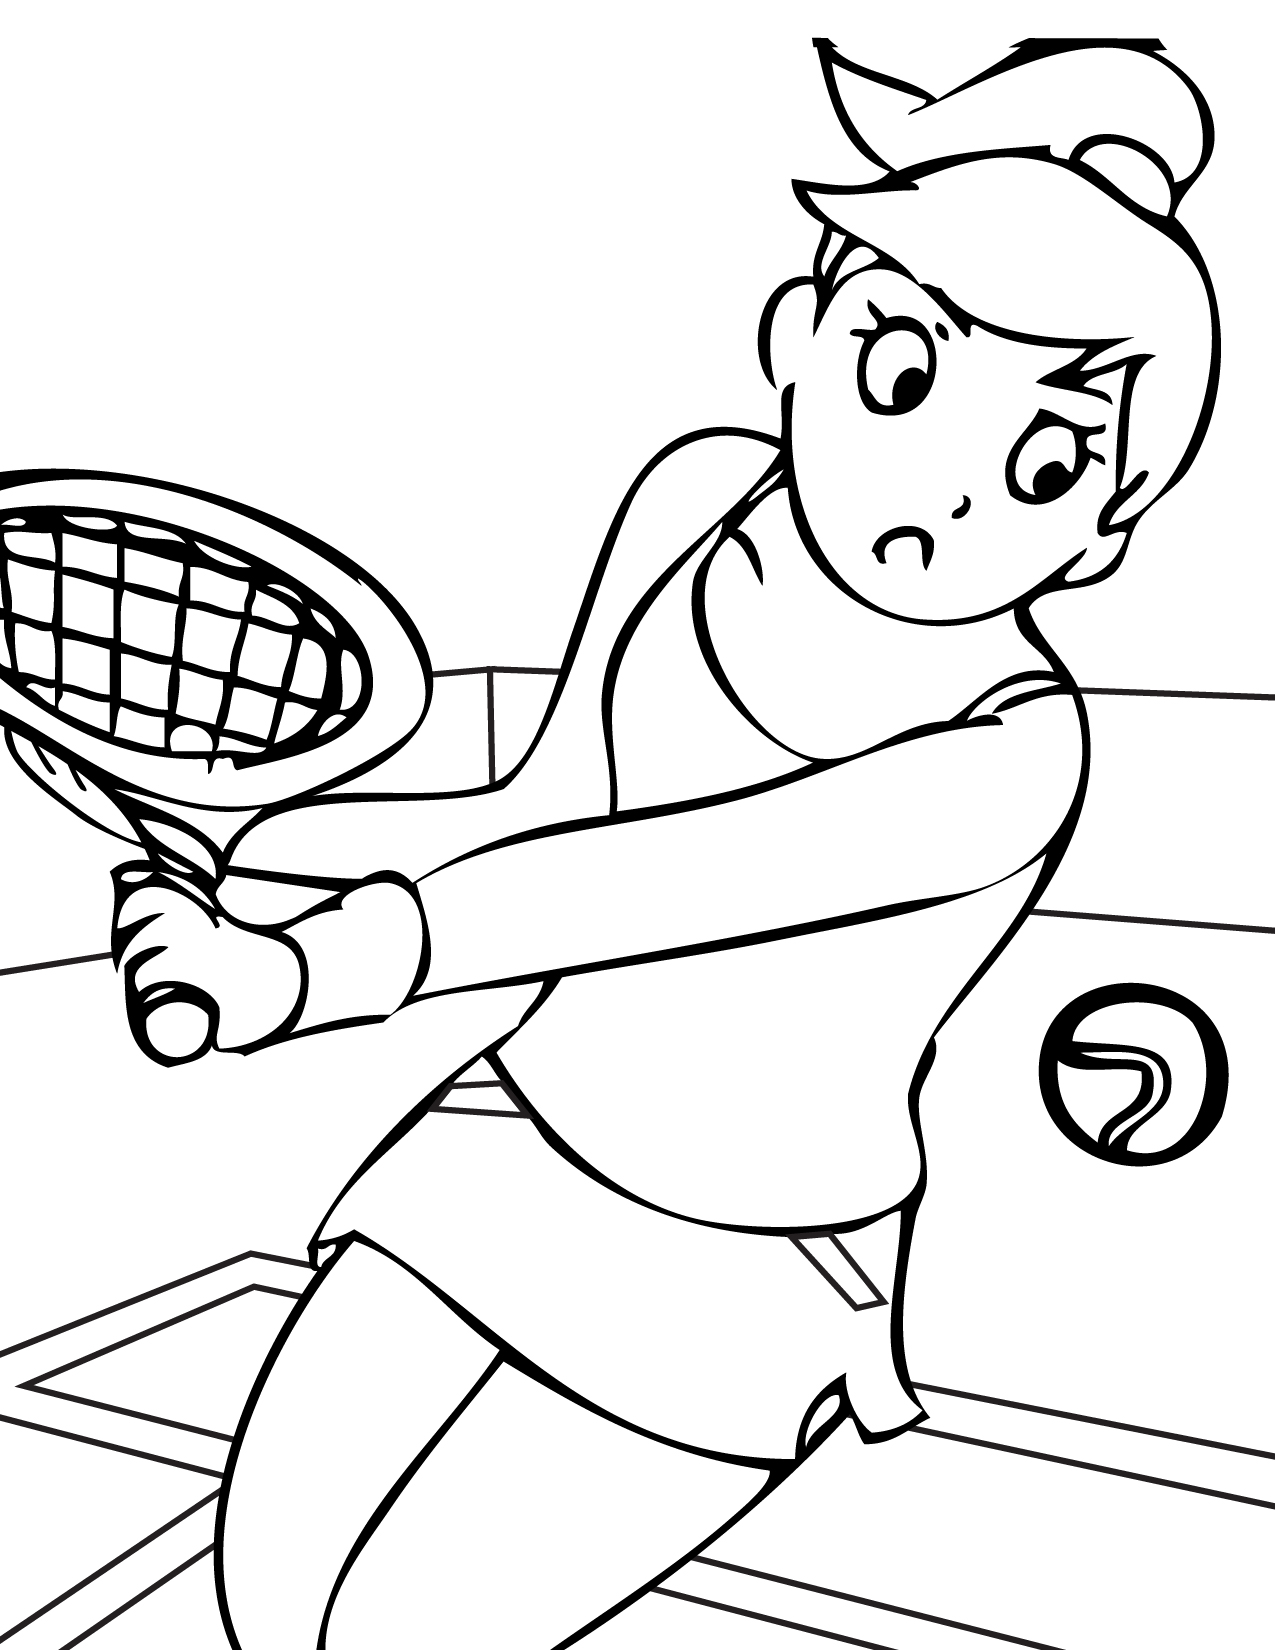 23-tennis-coloring-pages-for-kids-print-color-craft